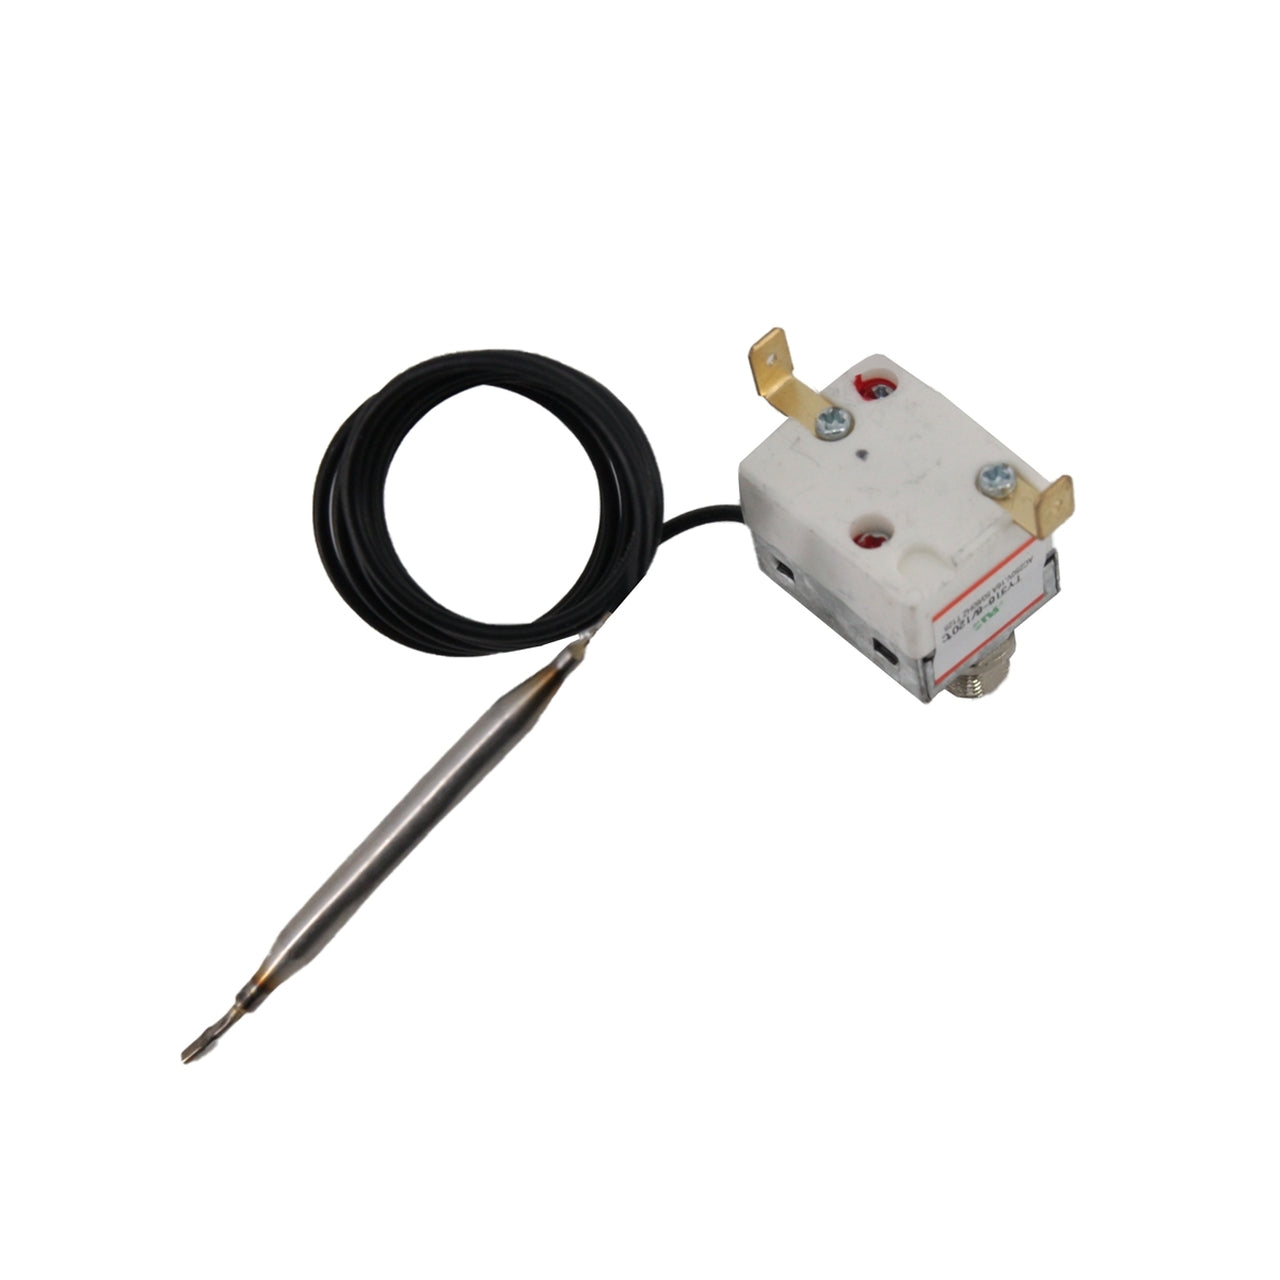 Aleko Replacement Temperature Control for ETL Toule Heaters - 140 degrees